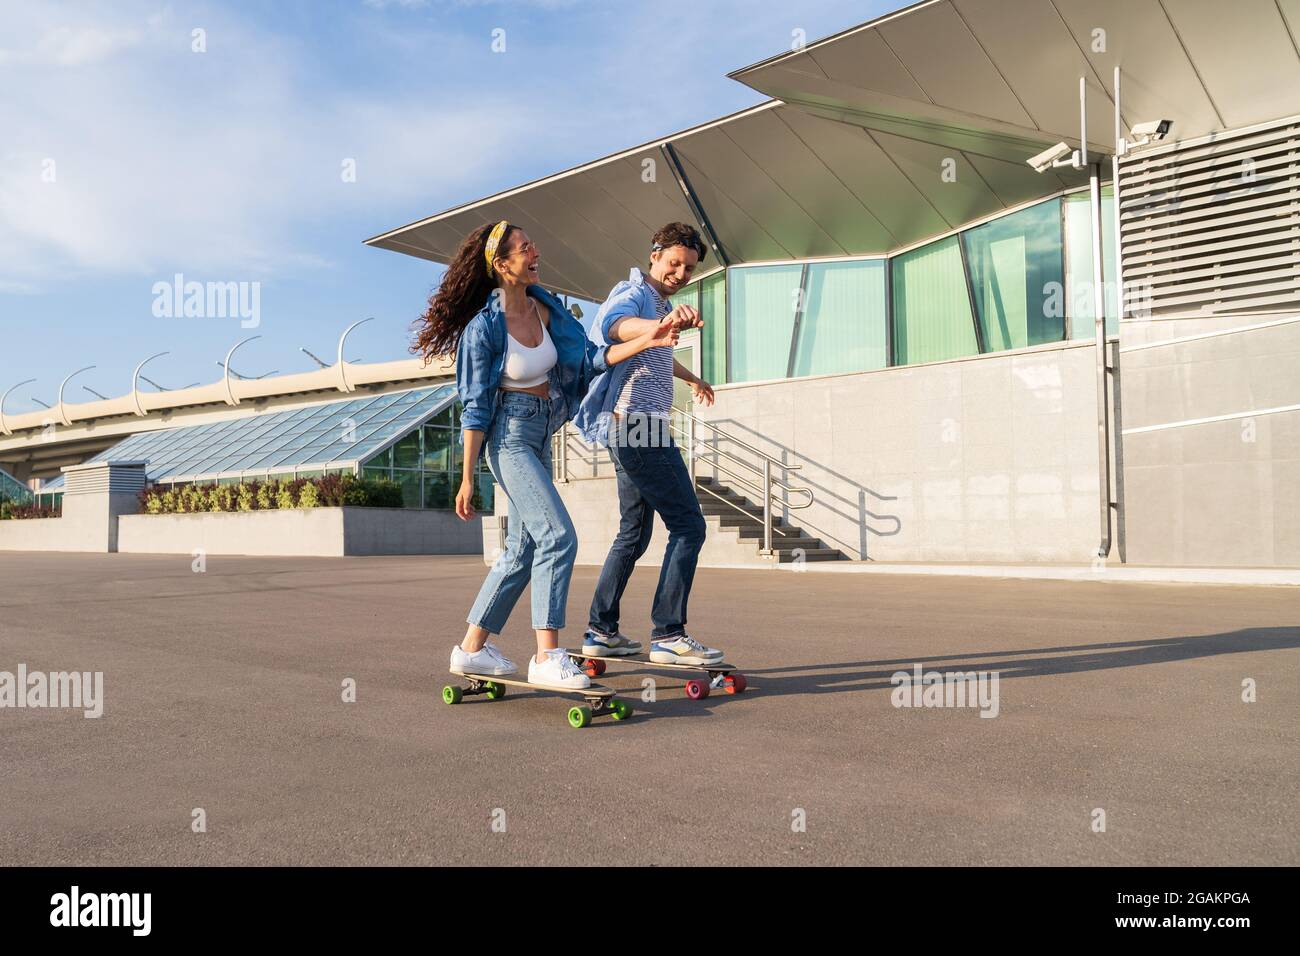 Joyful couple on date longboarding together: hipster guy skater teach laughing woman ride skateboard Stock Photo